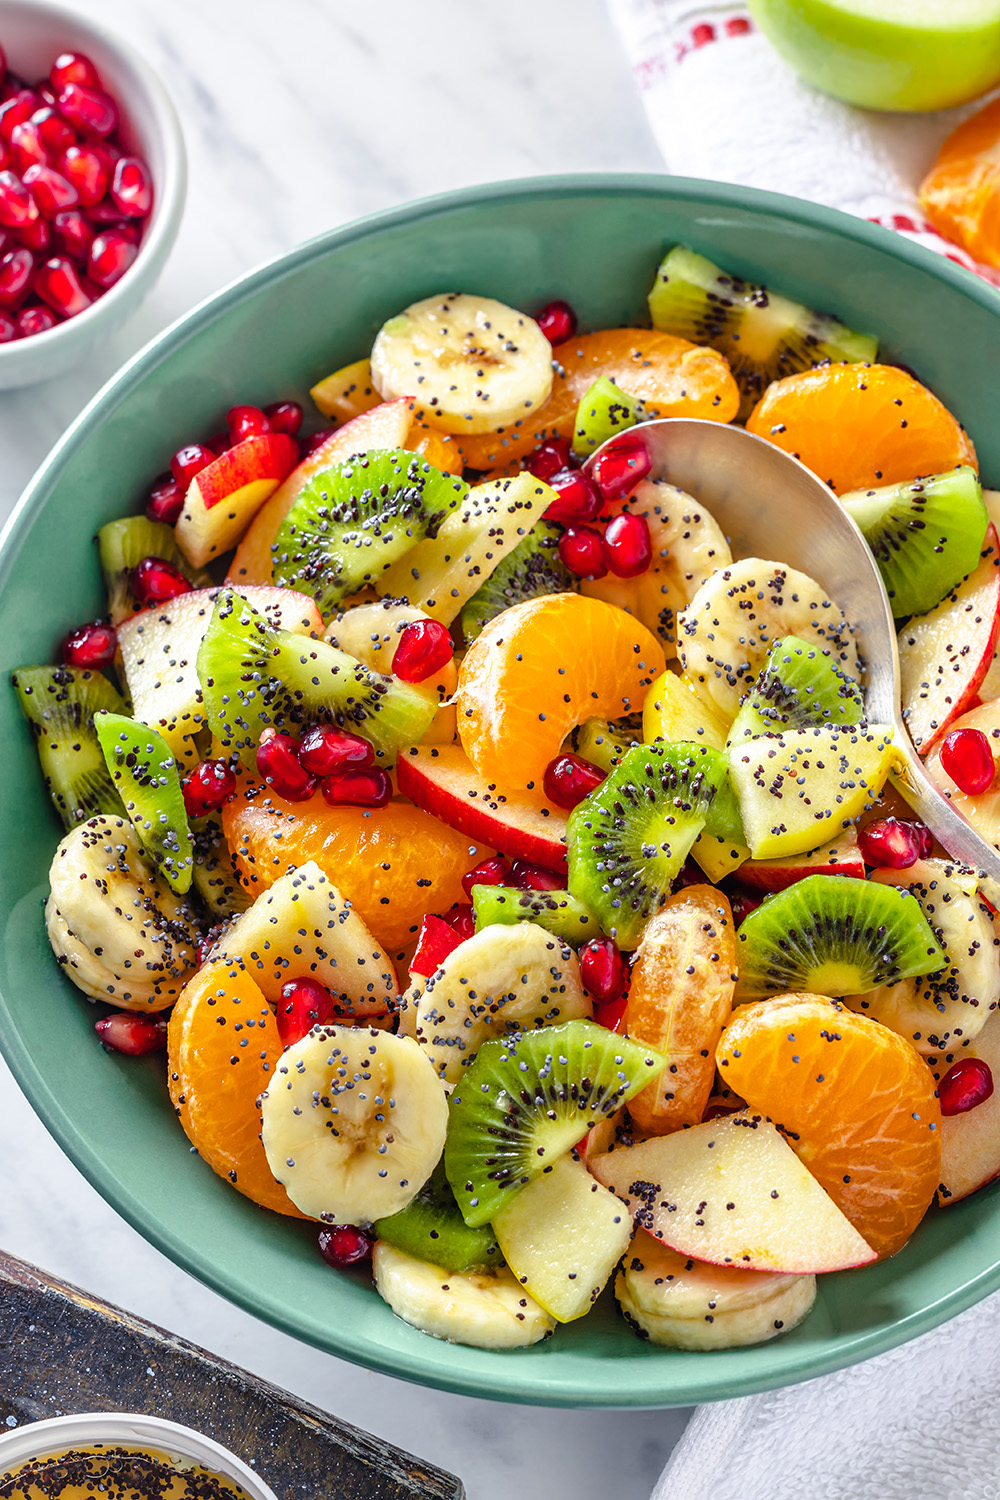 Winter Fruit Salad with Poppy Seed Dressing